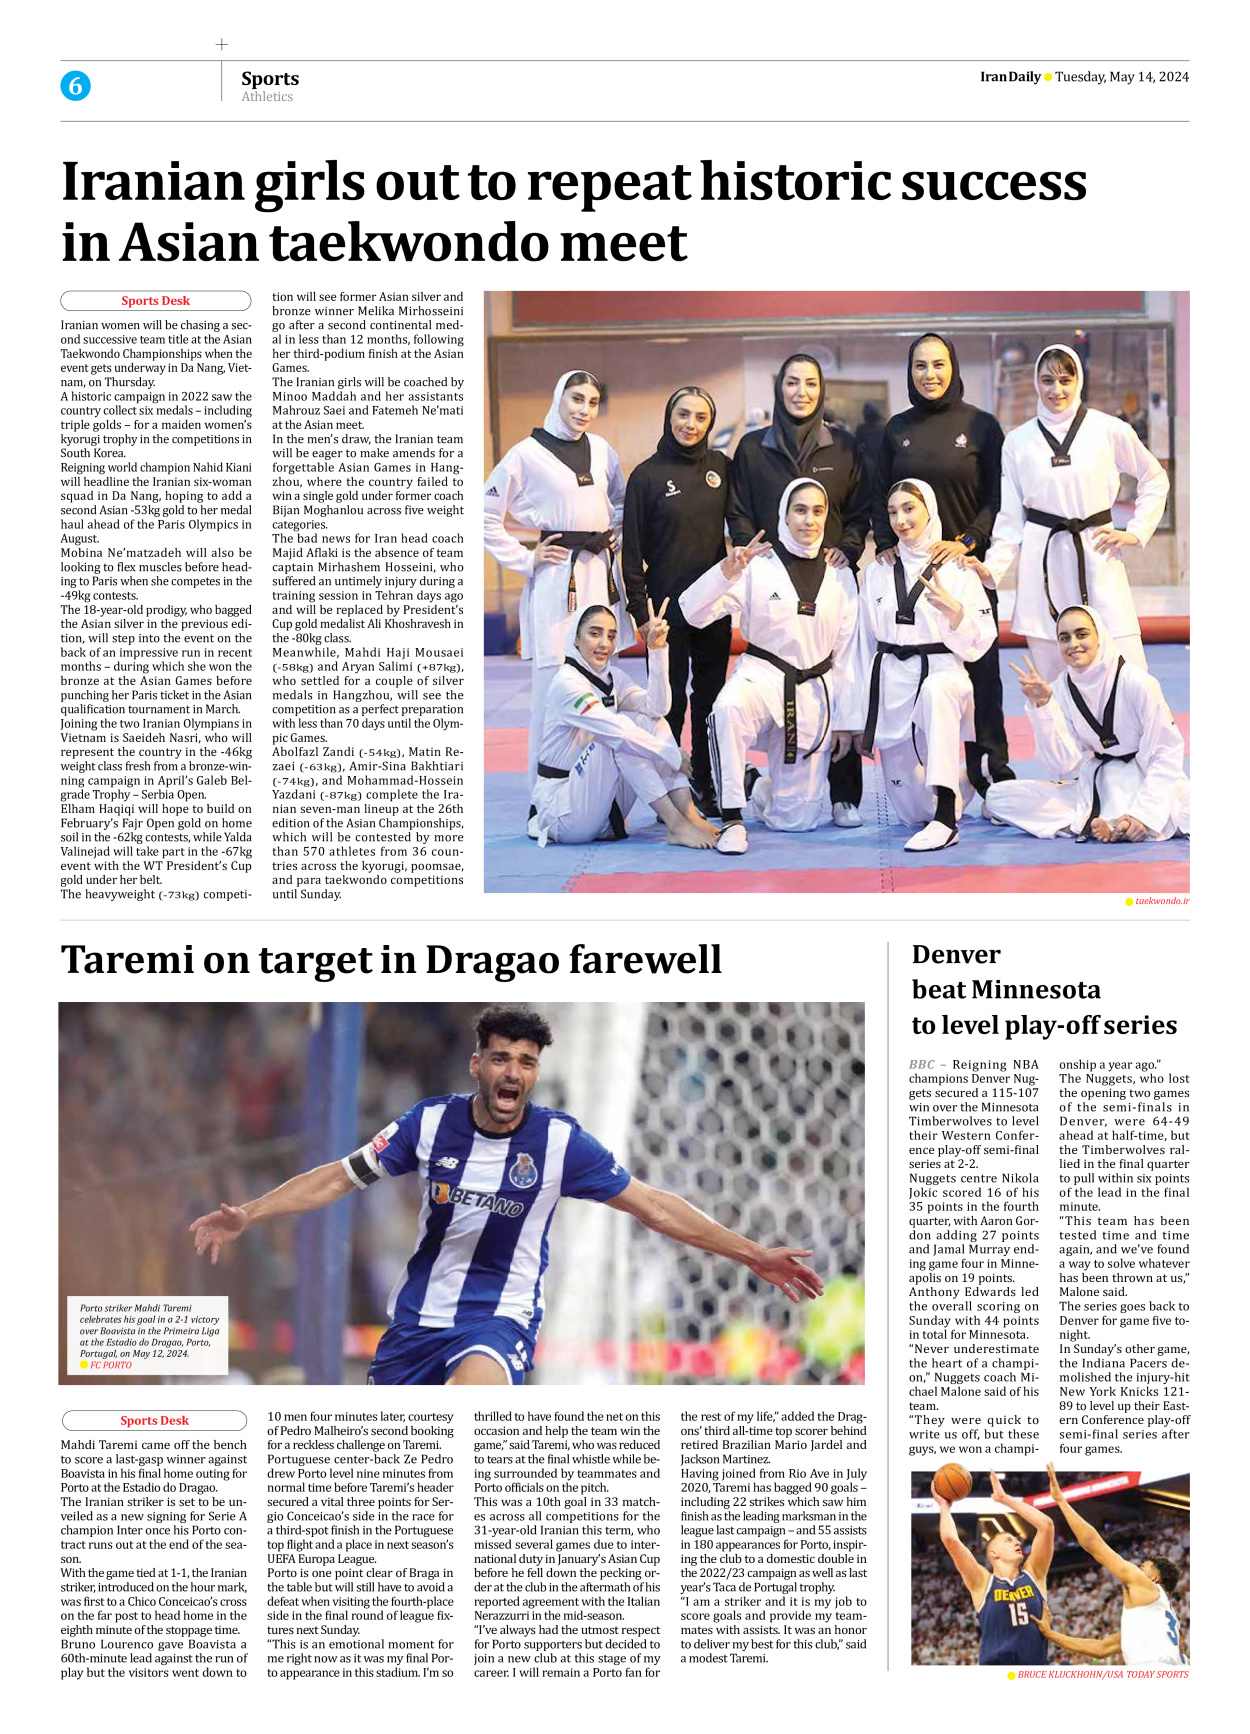 Iran Daily - Number Seven Thousand Five Hundred and Fifty Seven - 14 May 2024 - Page 6